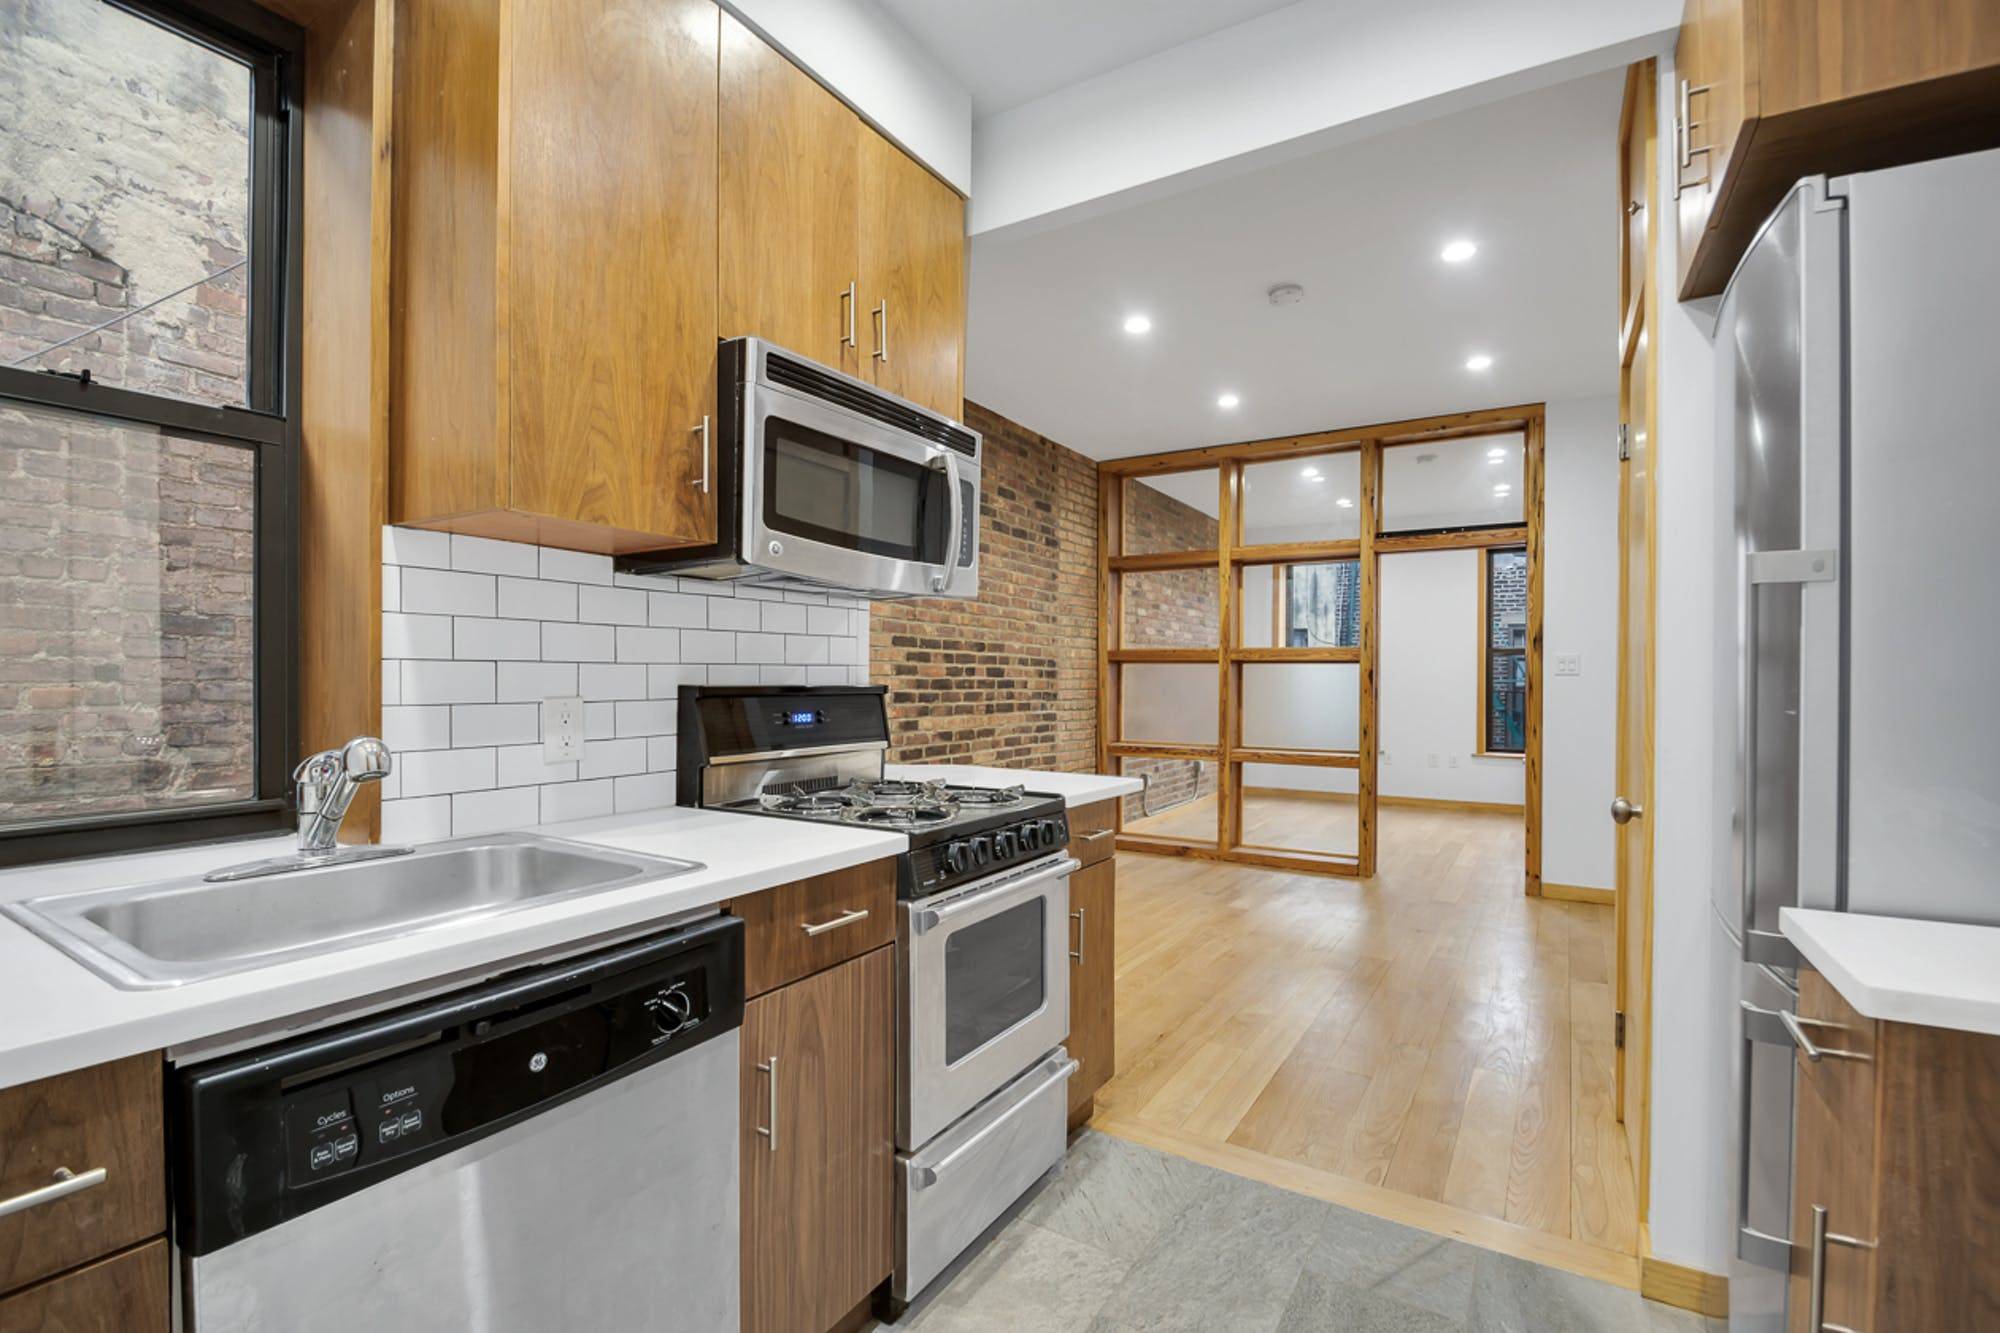 98 Suffolk Street between Rivington and Delancey Street Apartment 2C NEWLY RENOVATED 1 BEDROOM APARTMENT LAUNDRY IN BUILDING a PRIME LES LOCATION !